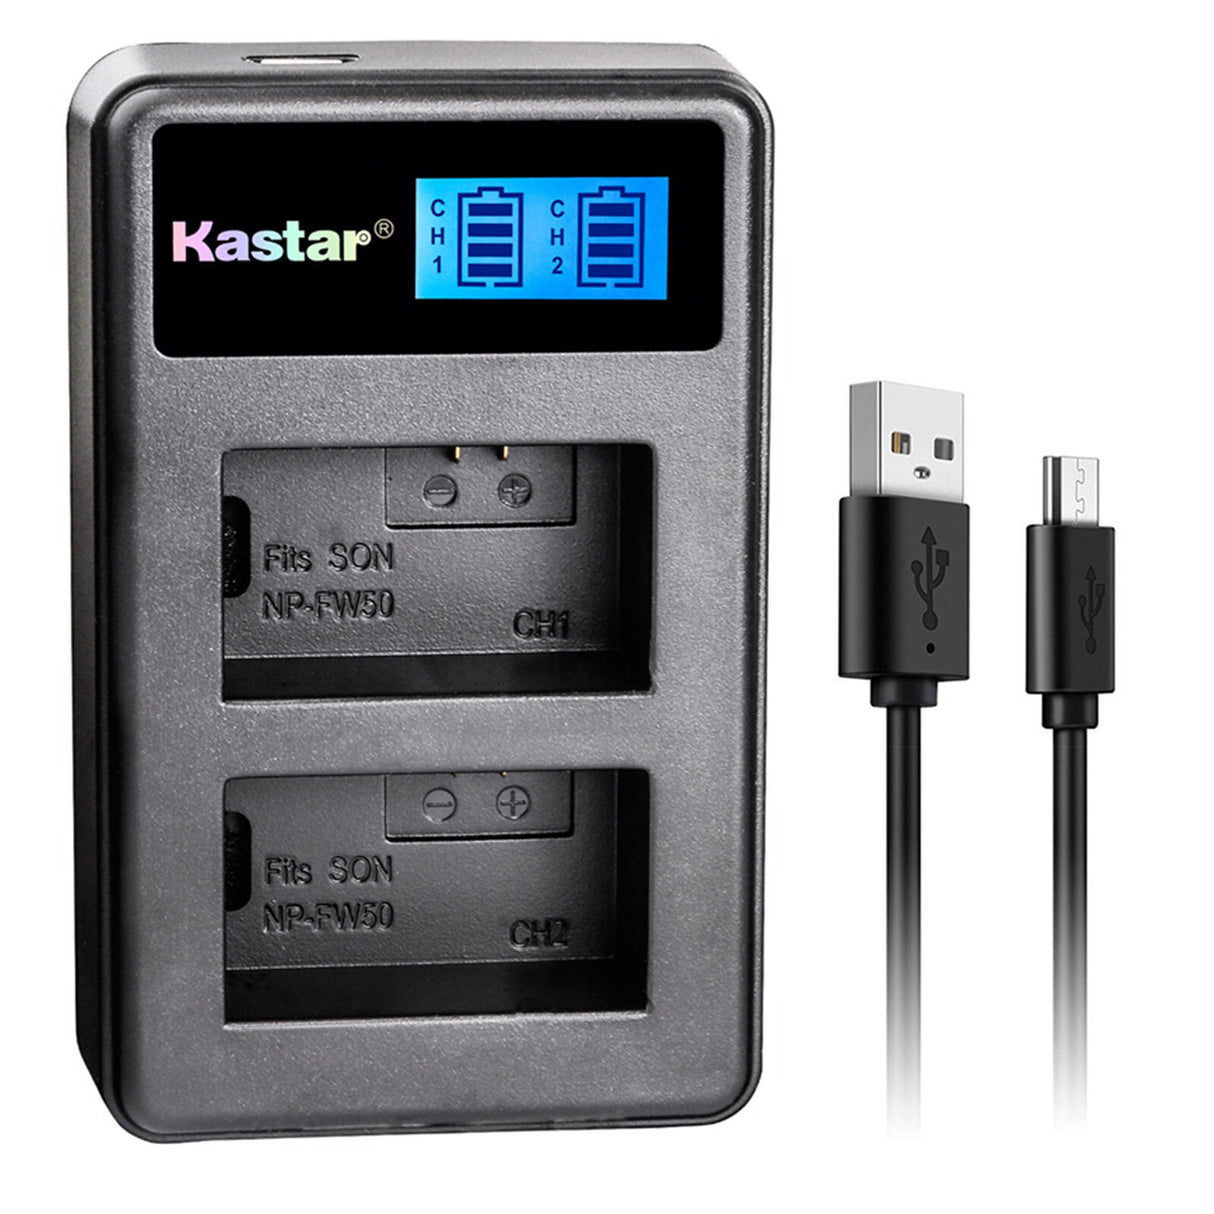 Kastar NP-FW50 dual charger